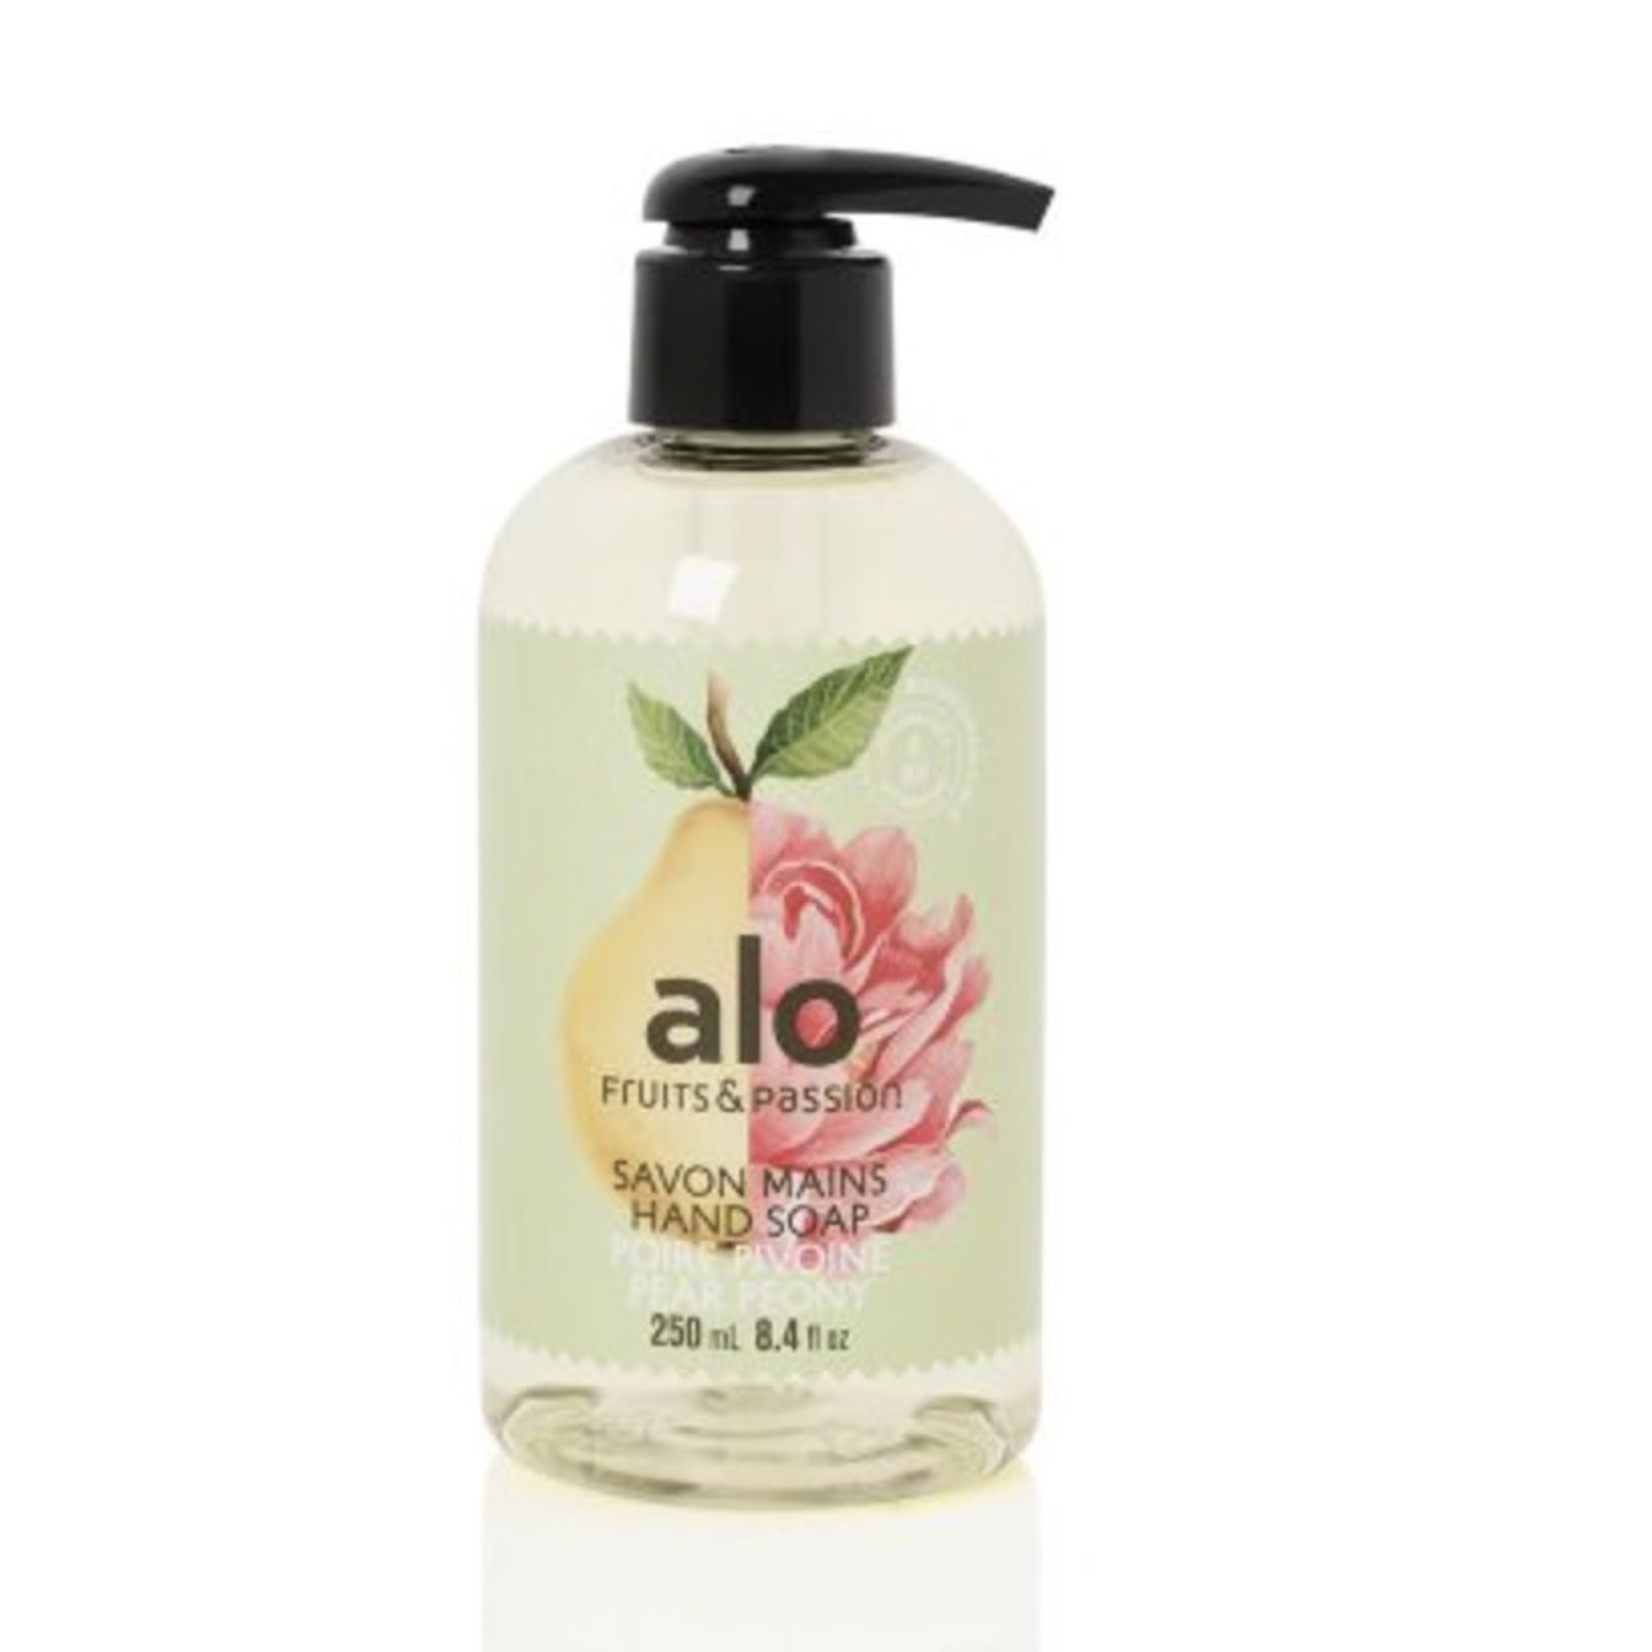 ALO FRUITS & PASSION FRUITS & PASSION Hand Soap 250ml - Pear Peony DNR